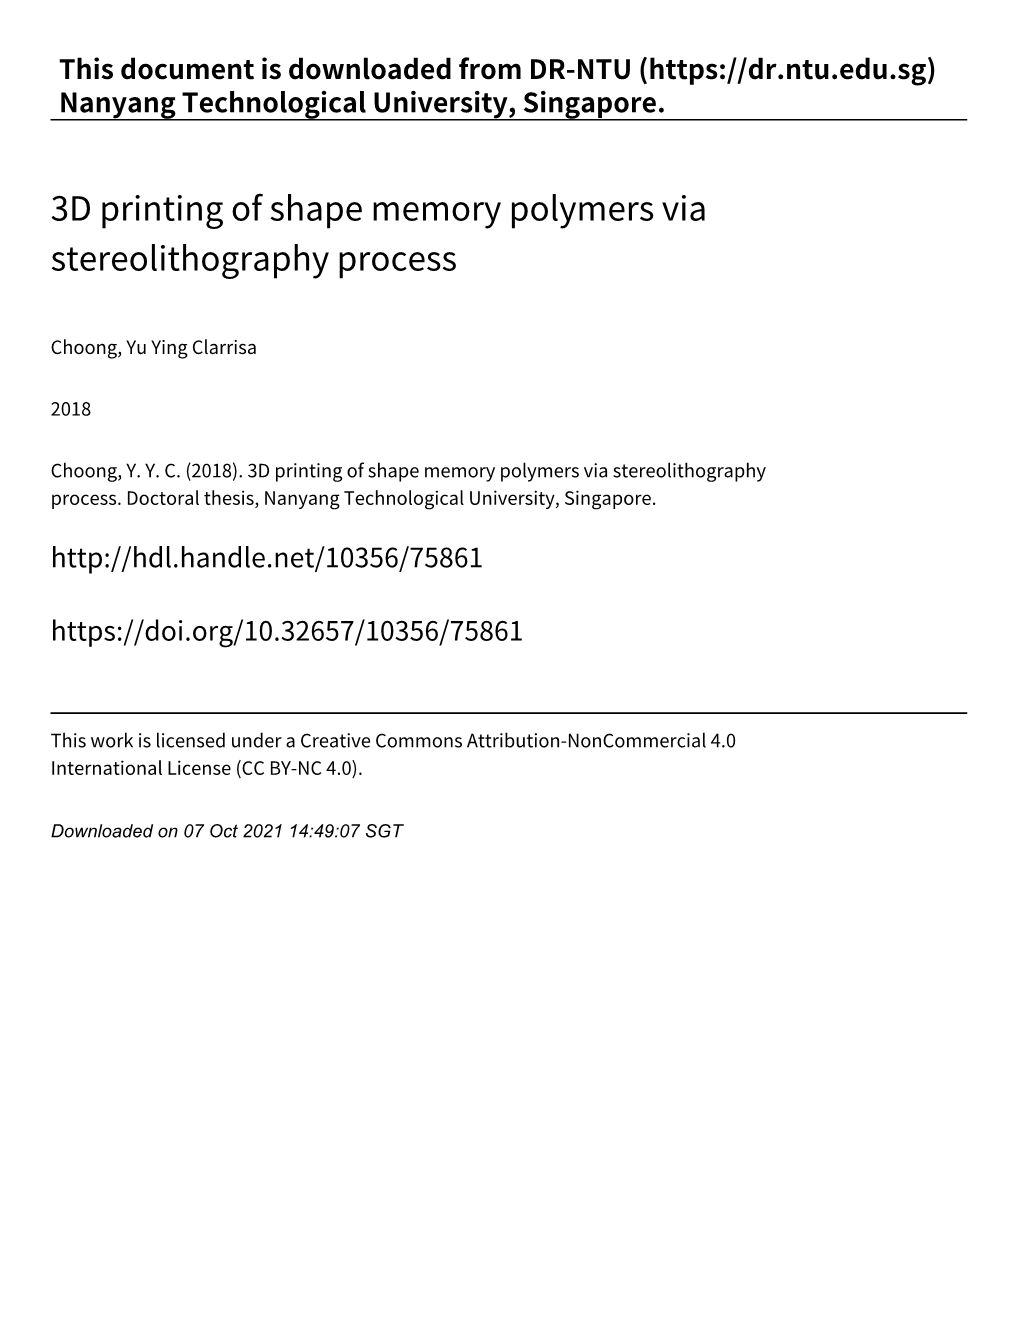 3D Printing of Shape Memory Polymers Via Stereolithography Process